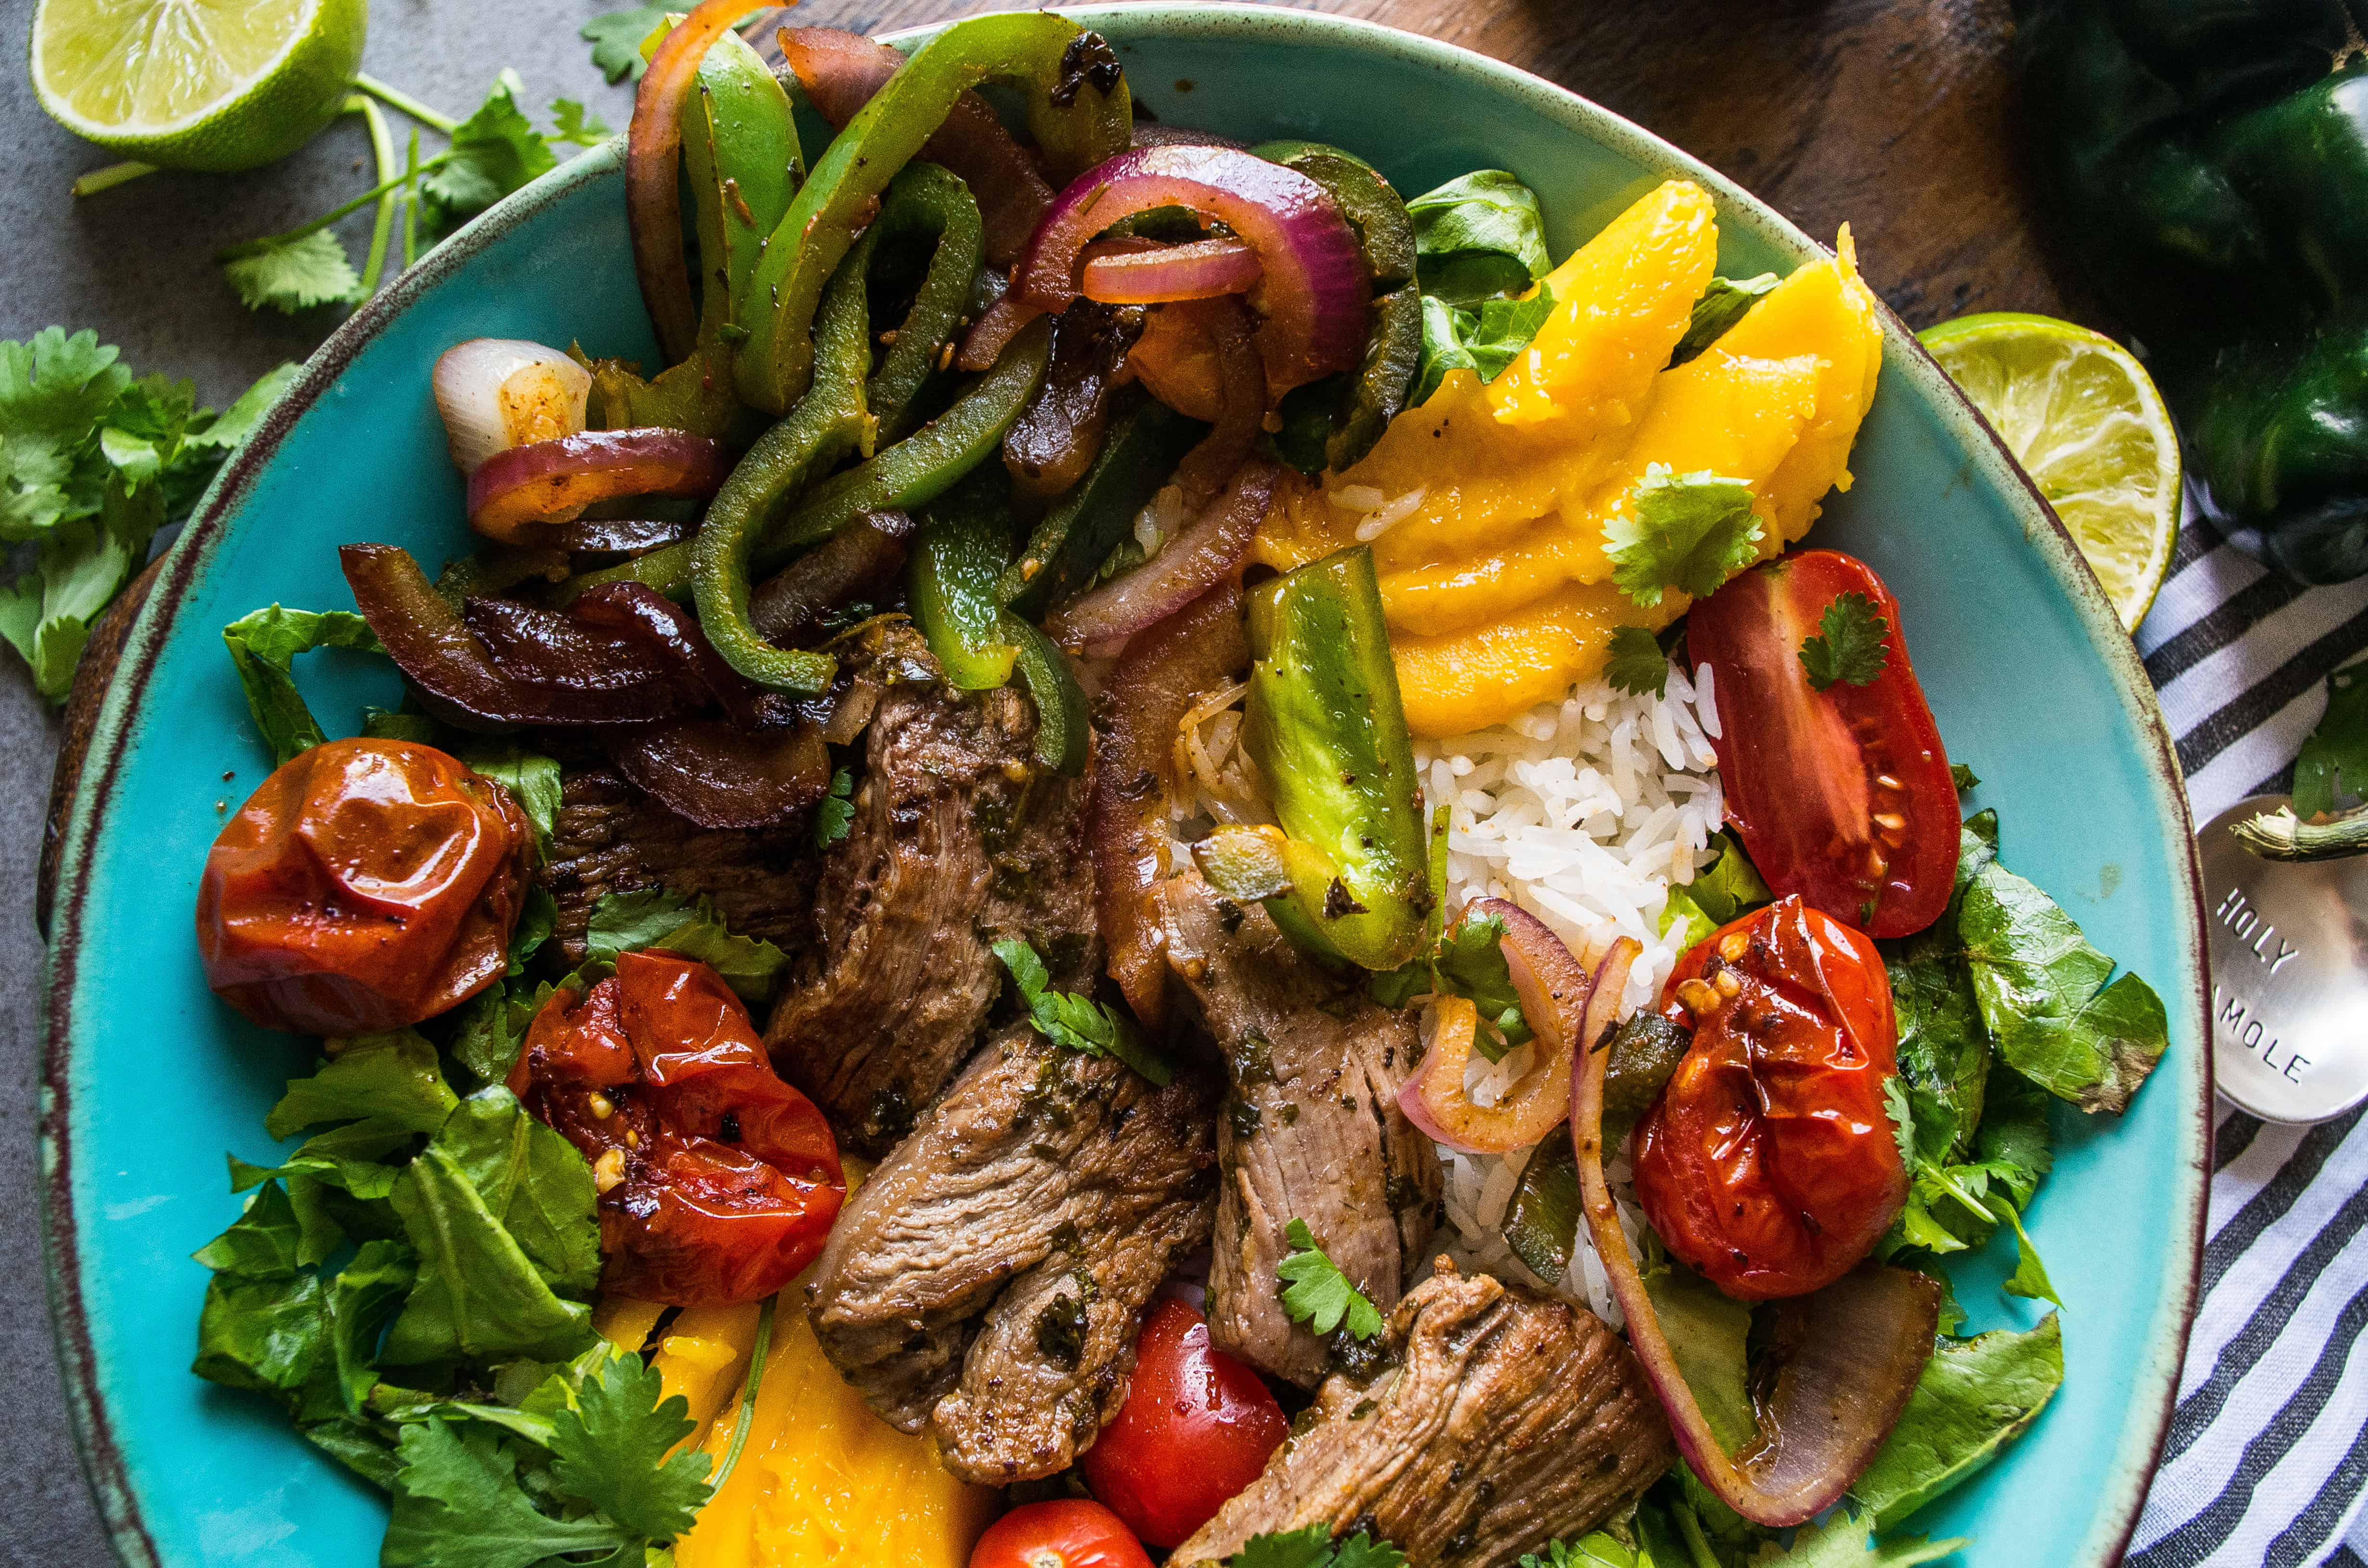 Chimichurri Steak Fajita Bowls- healthy mexican inspired bowl fillled with chimichurri marinated steak, sauteed peppers and onions. Makes for a perfect easy gluten free weeknight dinner!|thekitcheneer.com